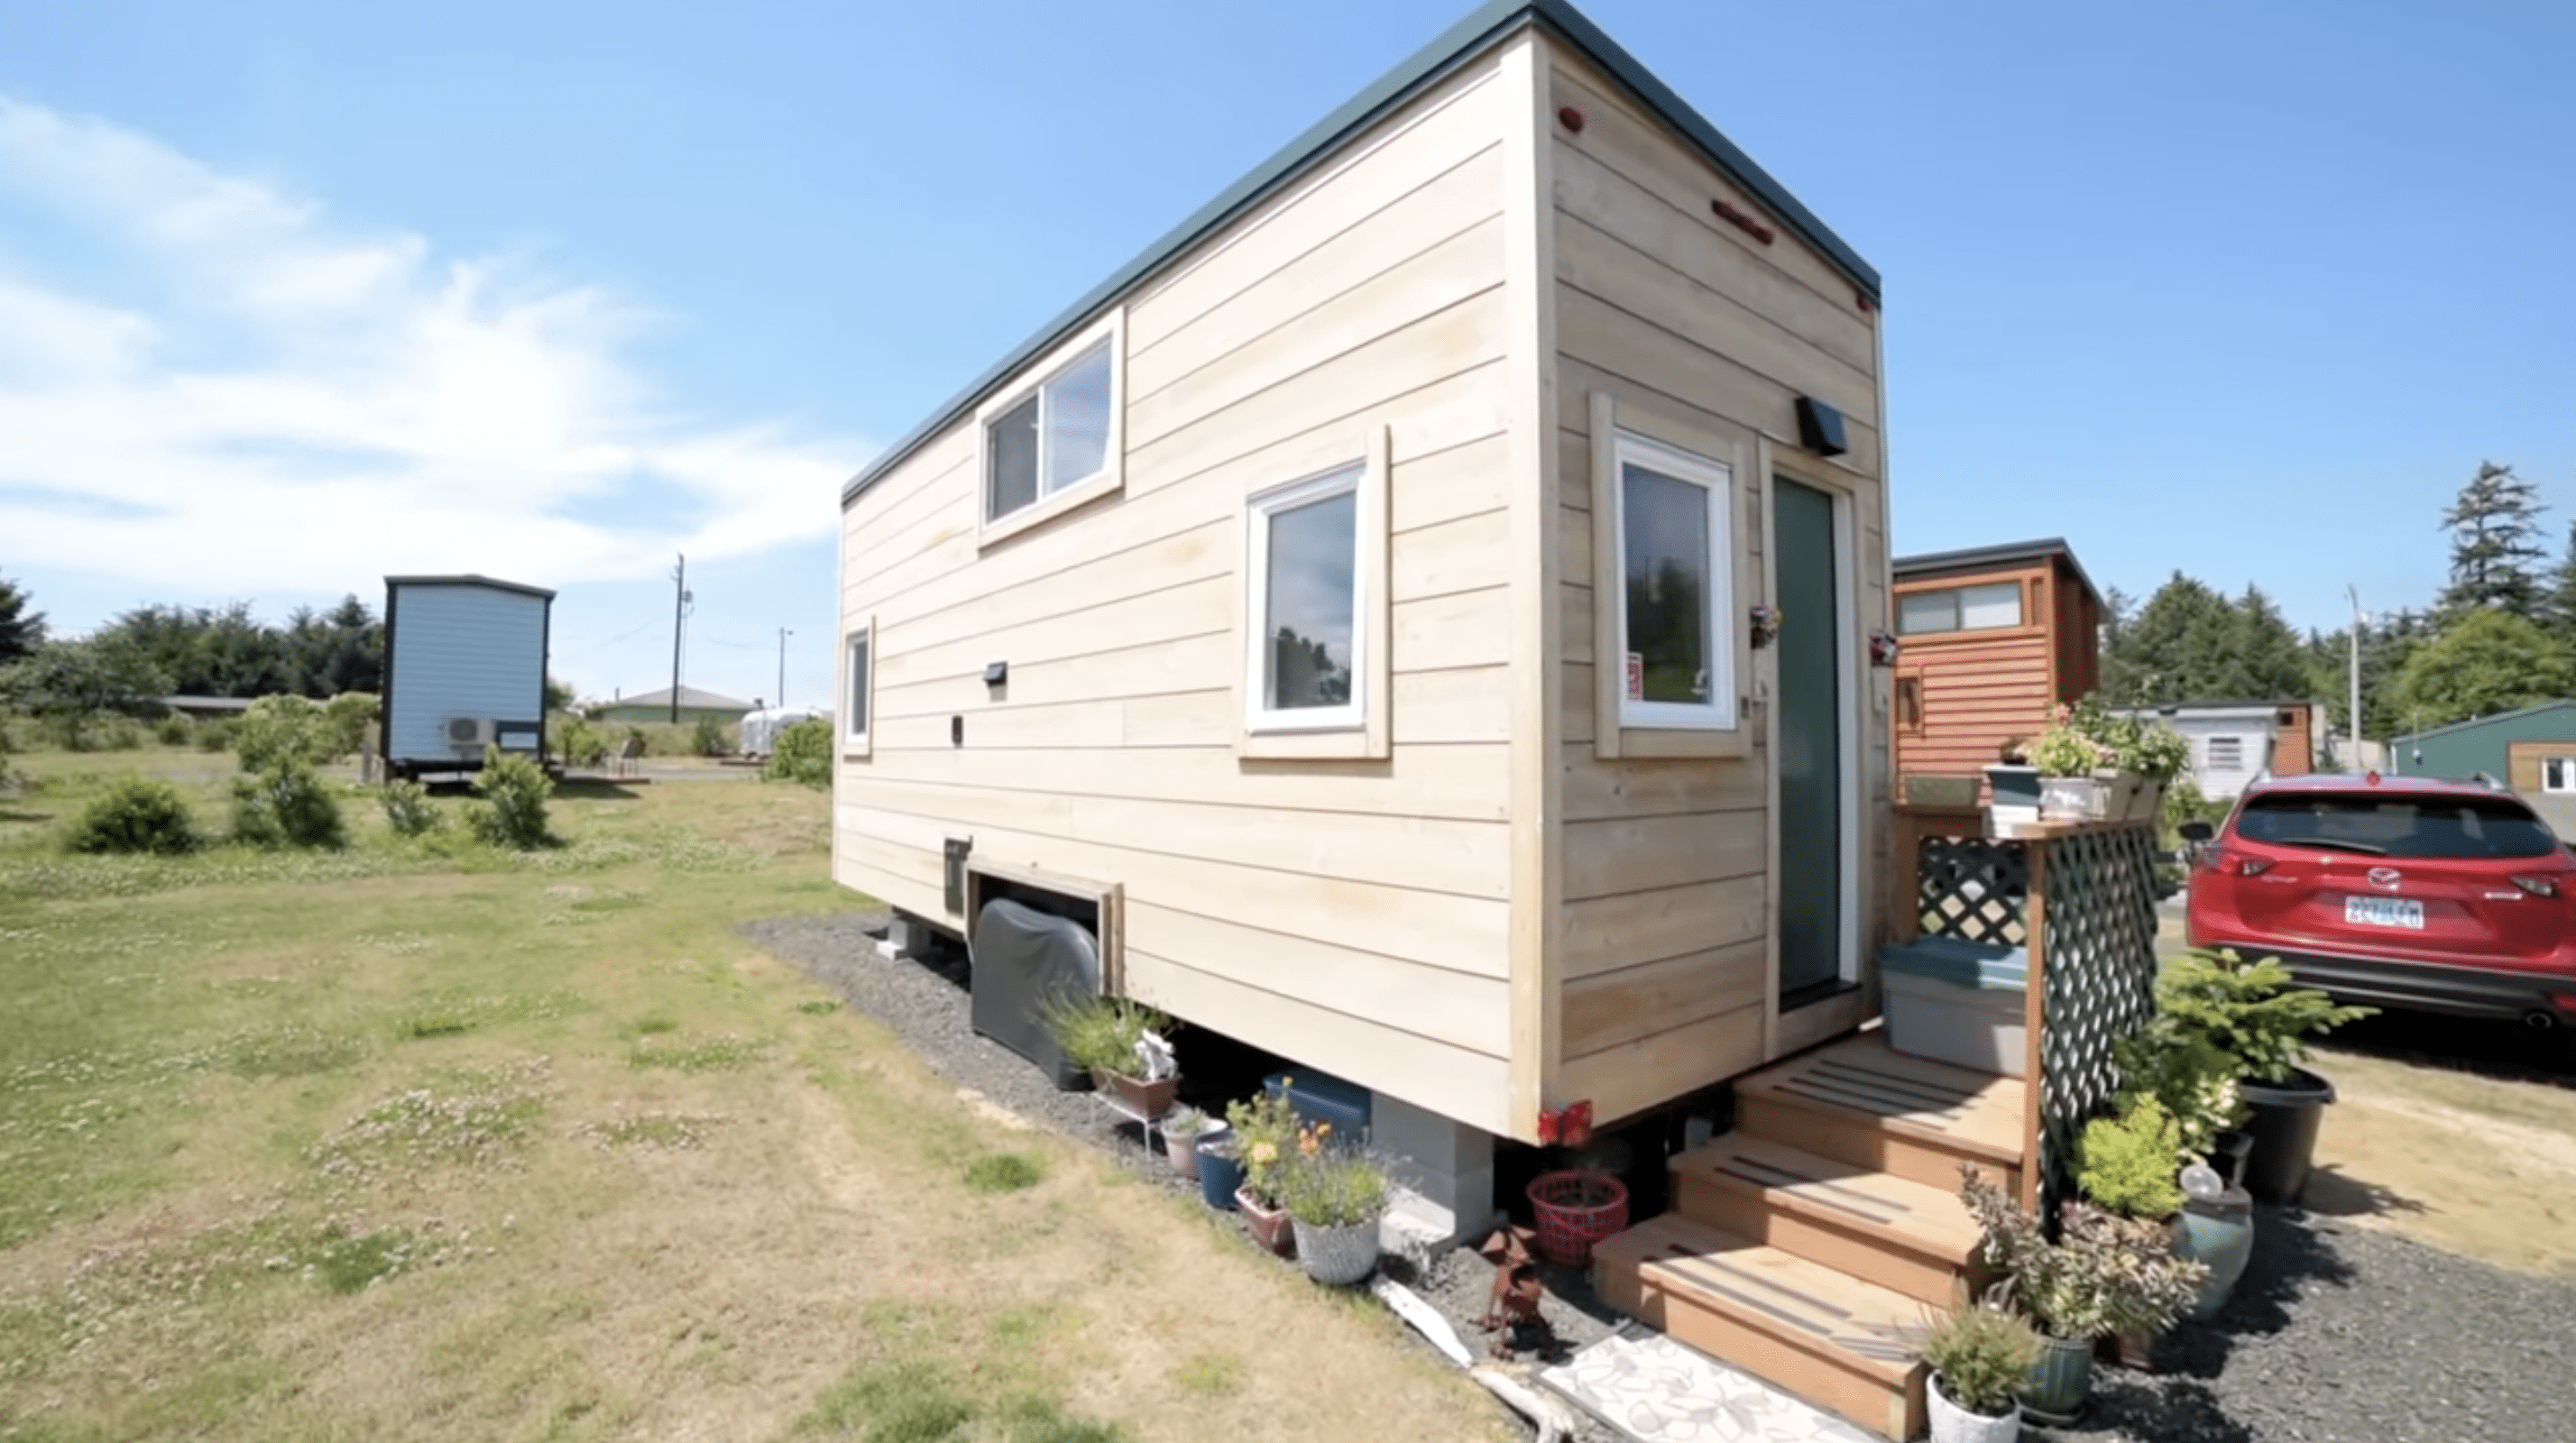 The front view of Penny's tiny home. | Source: YouTube.com/TinyHomeTours